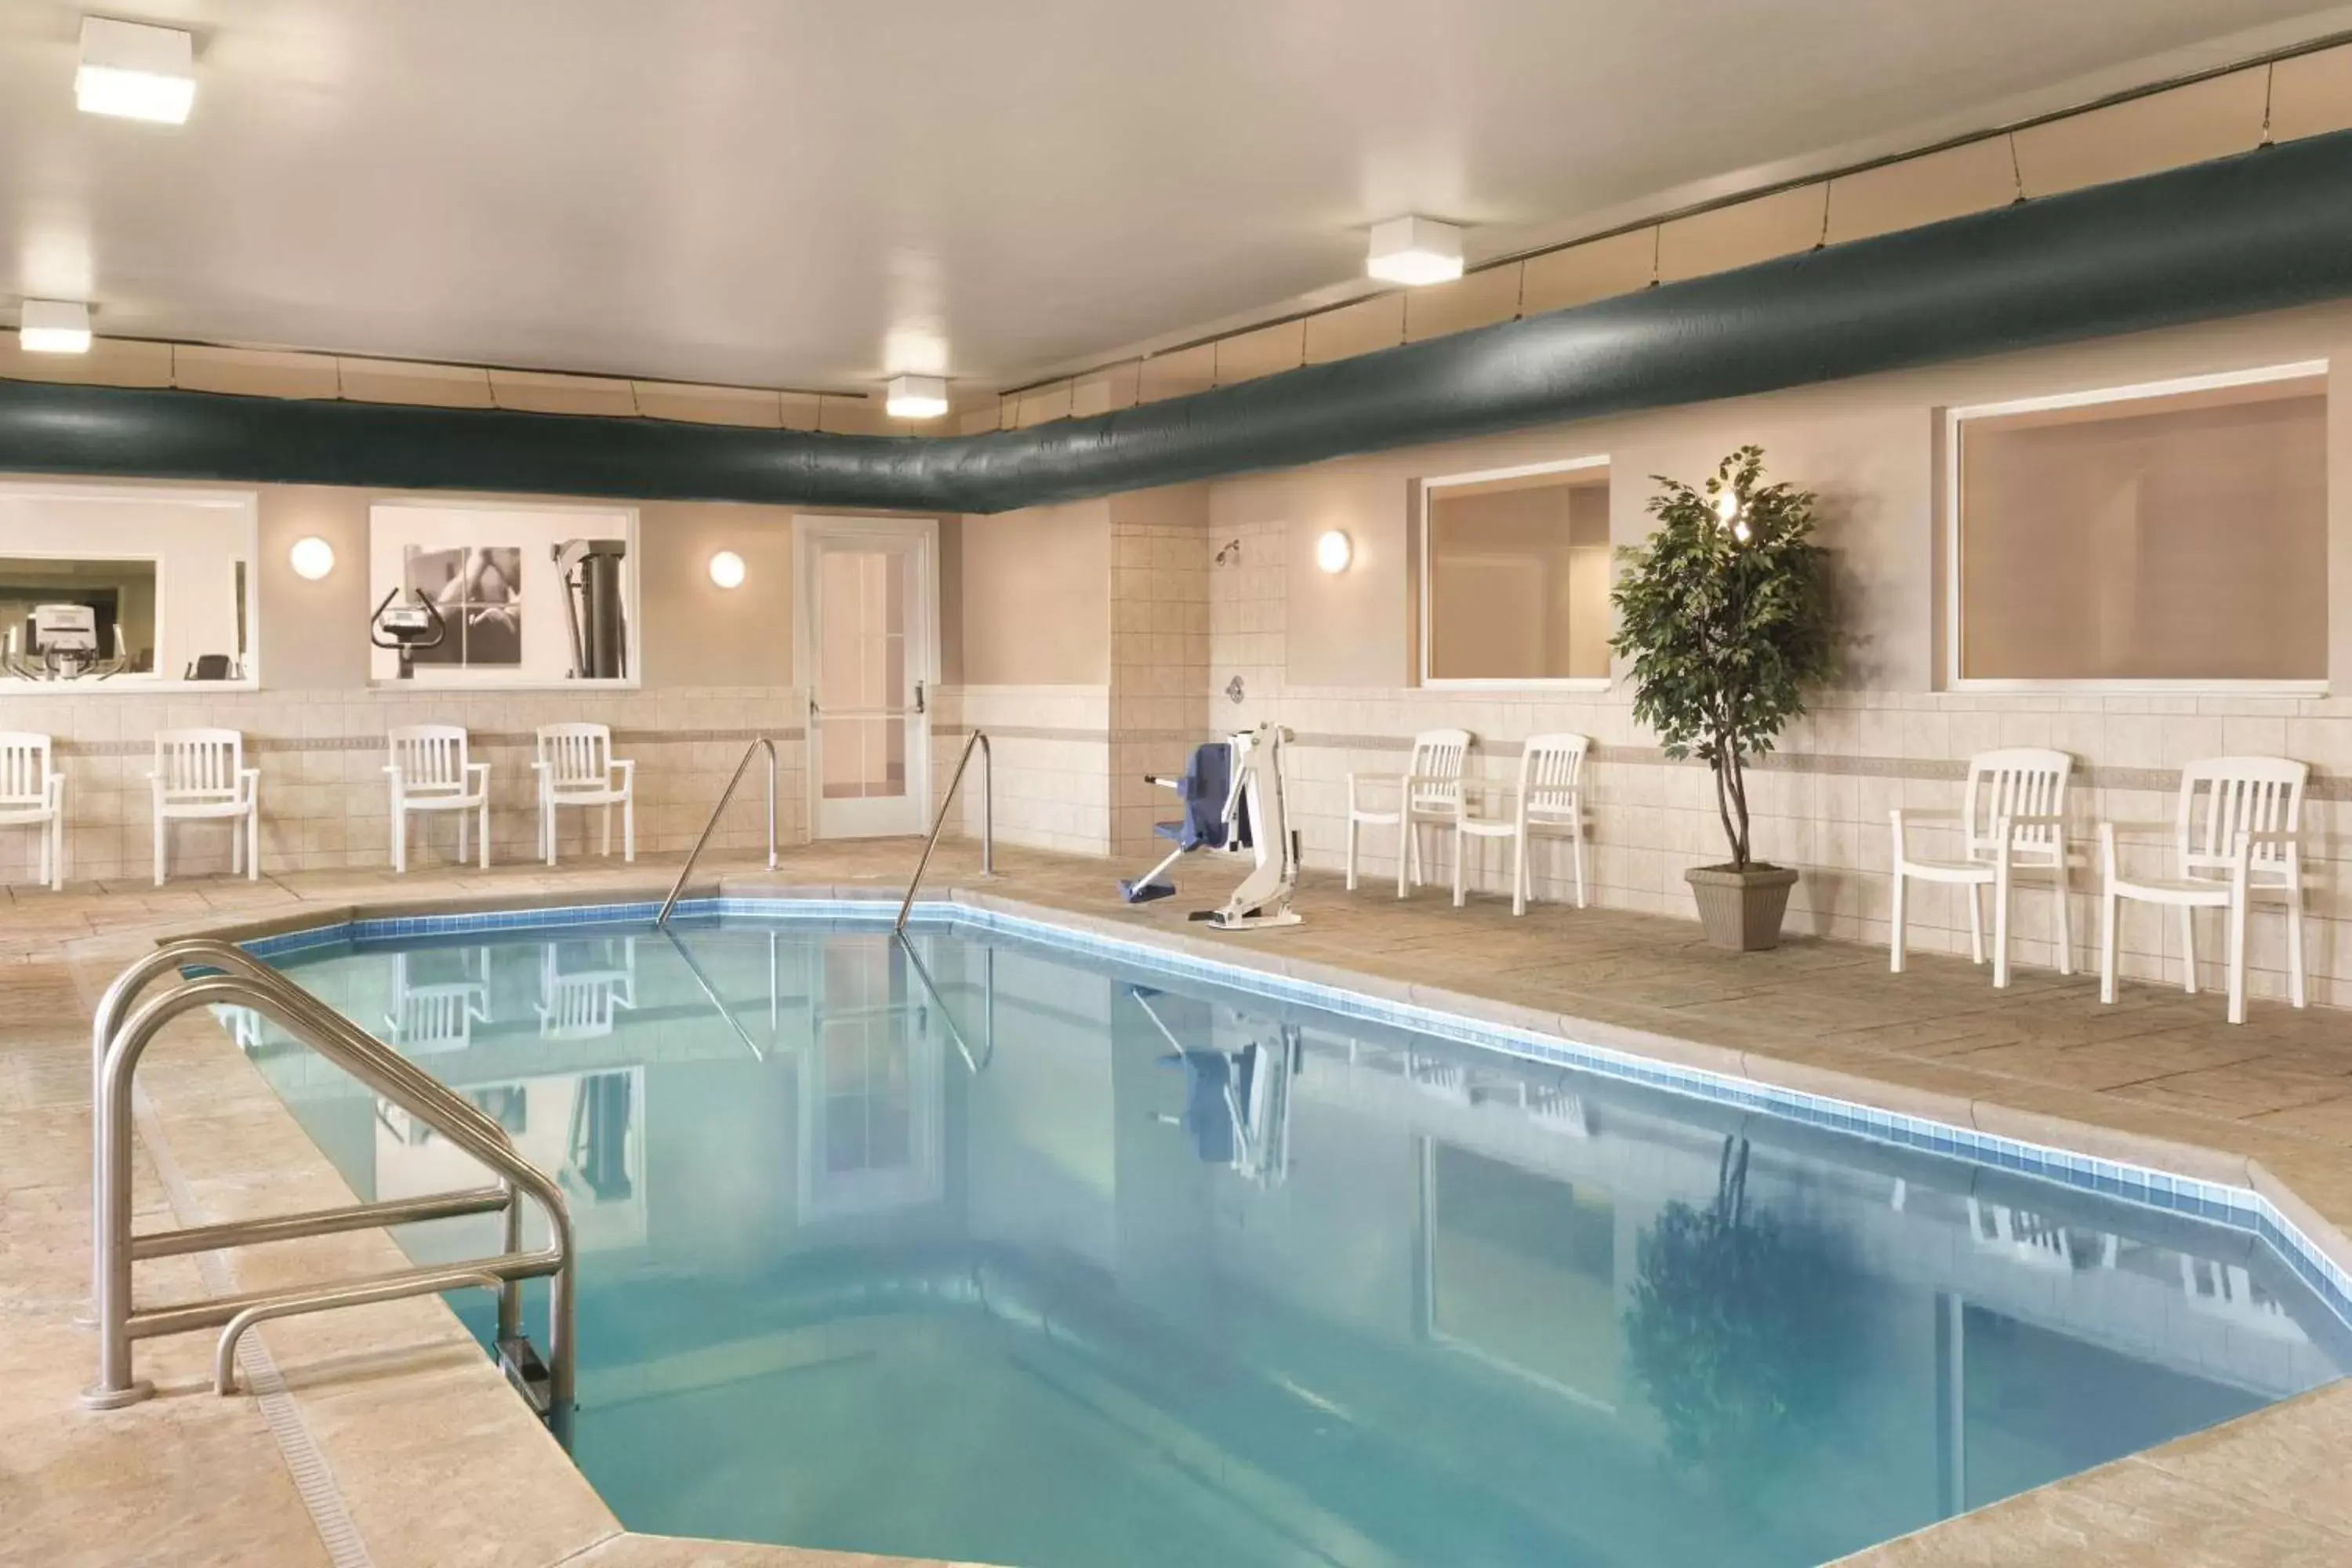 On site, Swimming Pool in Country Inn & Suites by Radisson, Indianapolis Airport South, IN